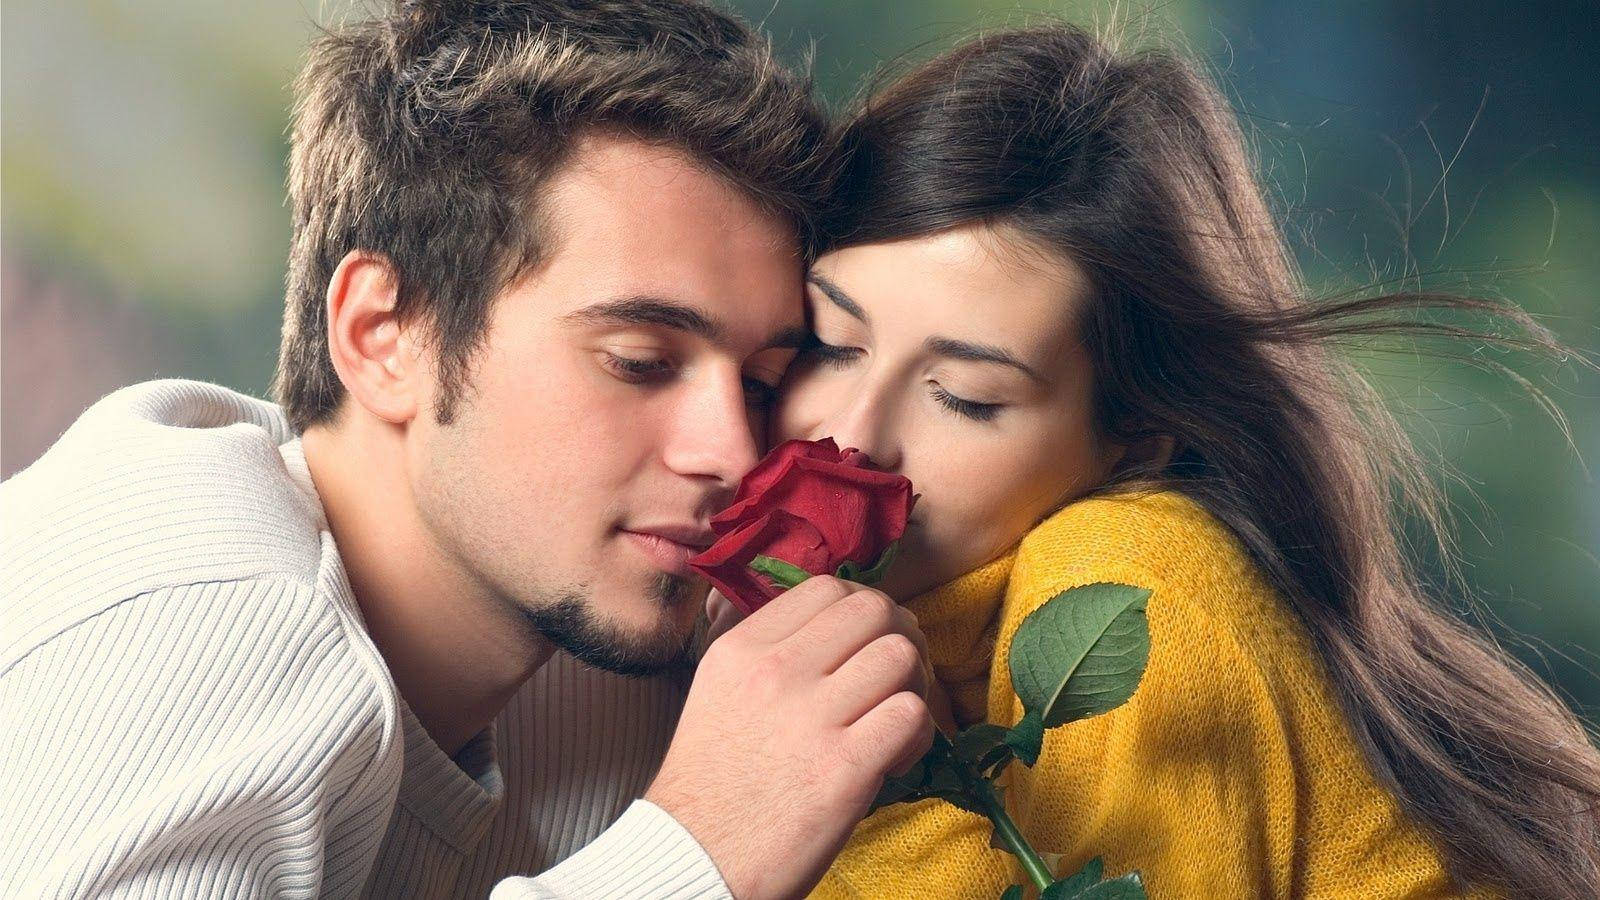 Romantic Couples Smelling A Rose Wallpaper